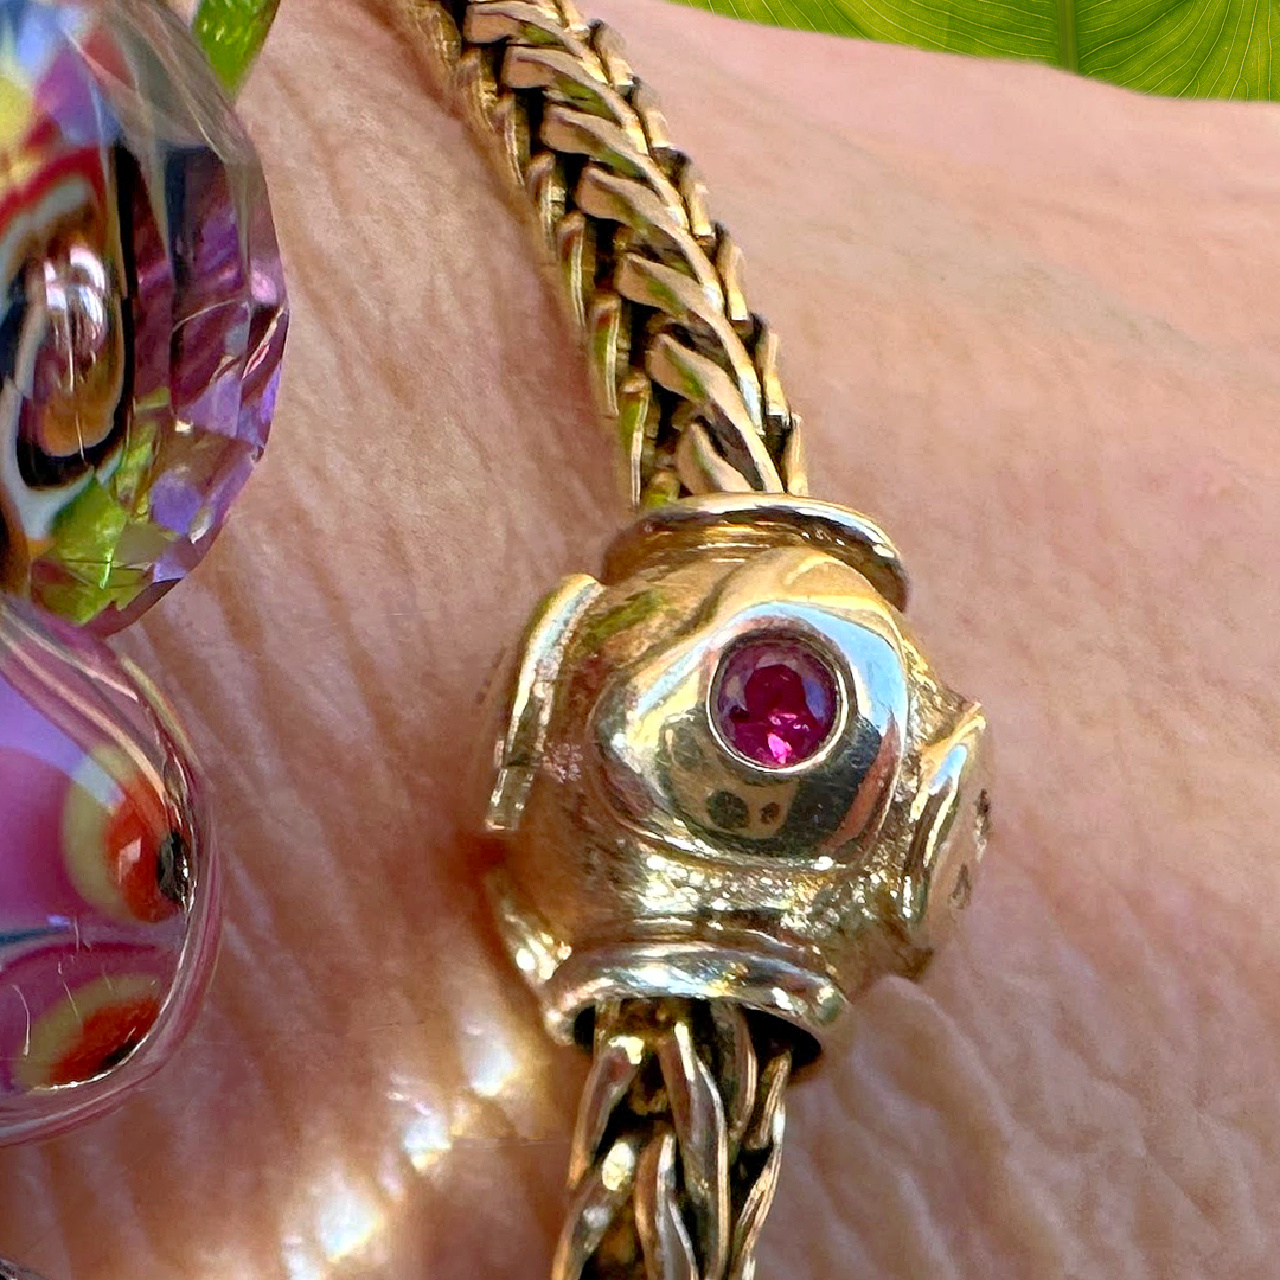 A wrist wearing an 18KT gold bracelet and gold heart bead with a ruby  in the centre.